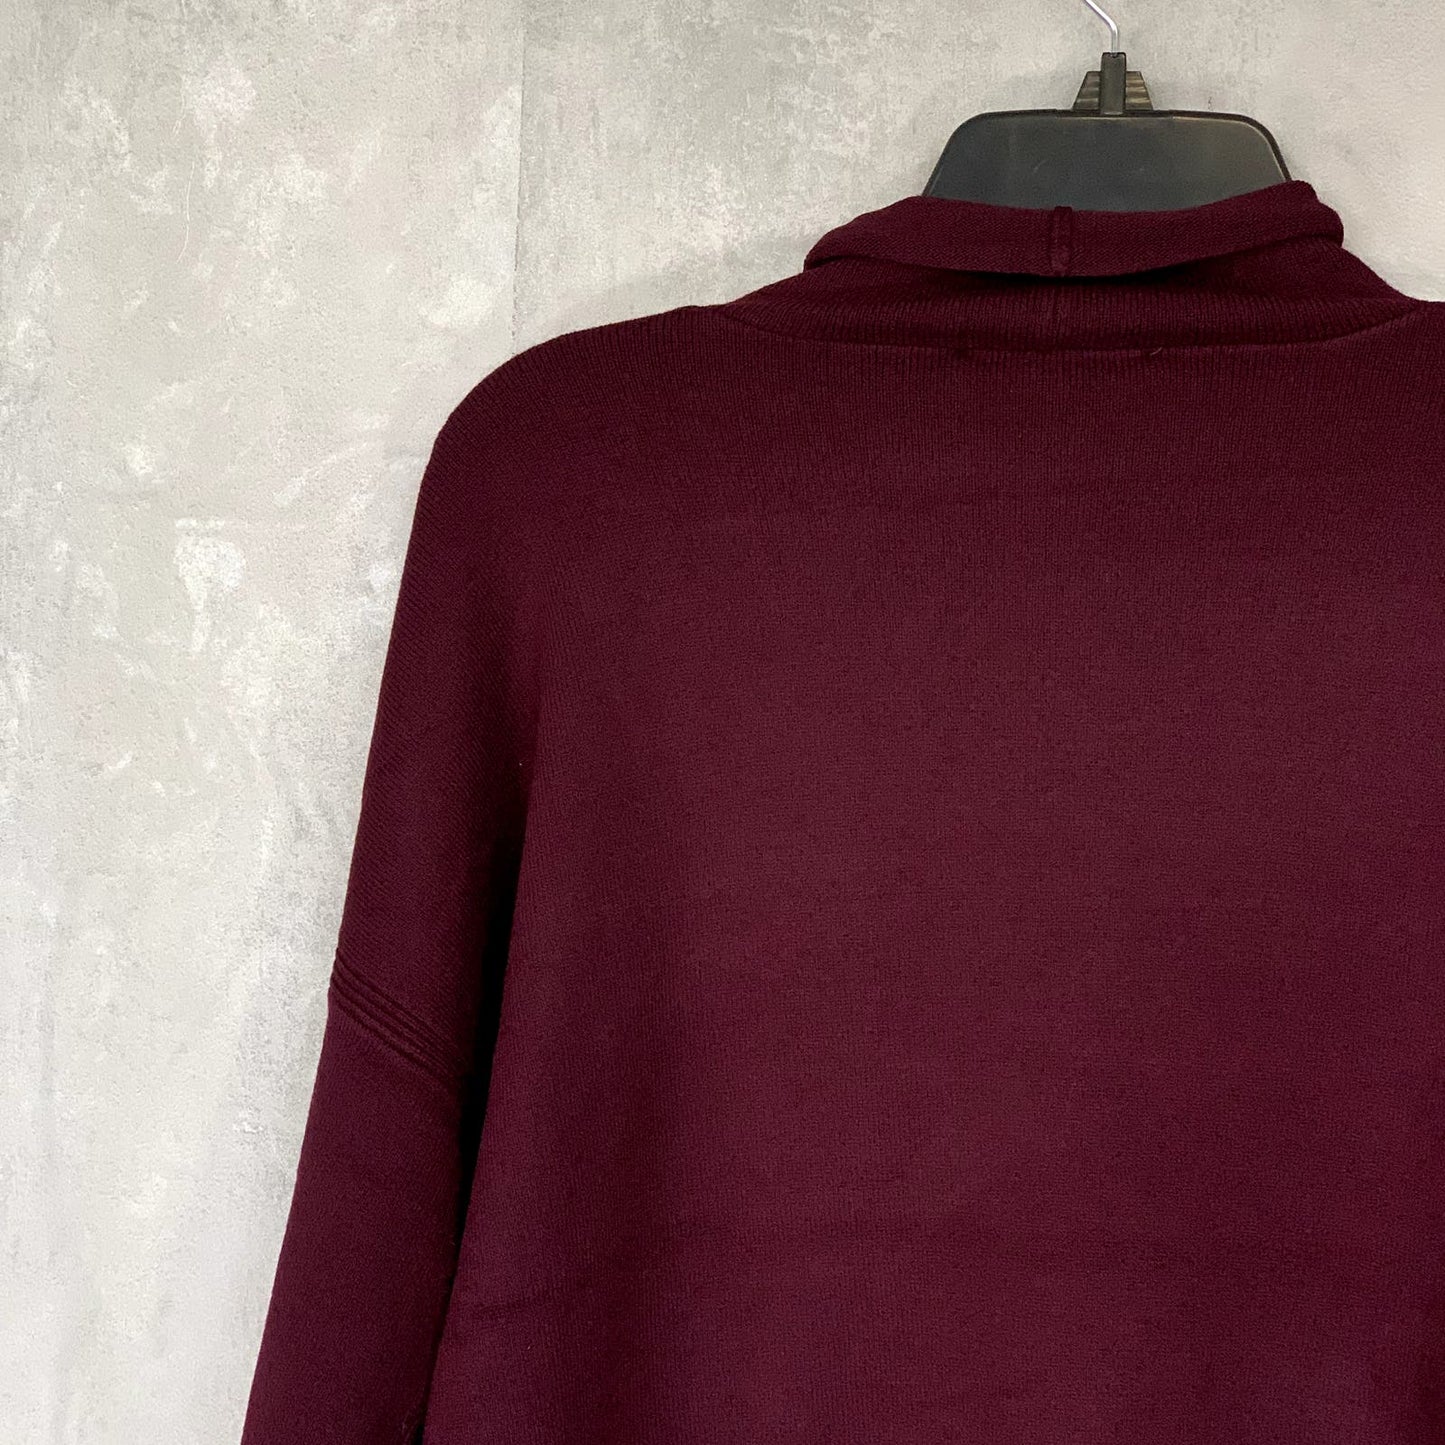 FRENCH CONNECTION Wine Turtleneck Long Sleeve Pullover Sweater SZ XS